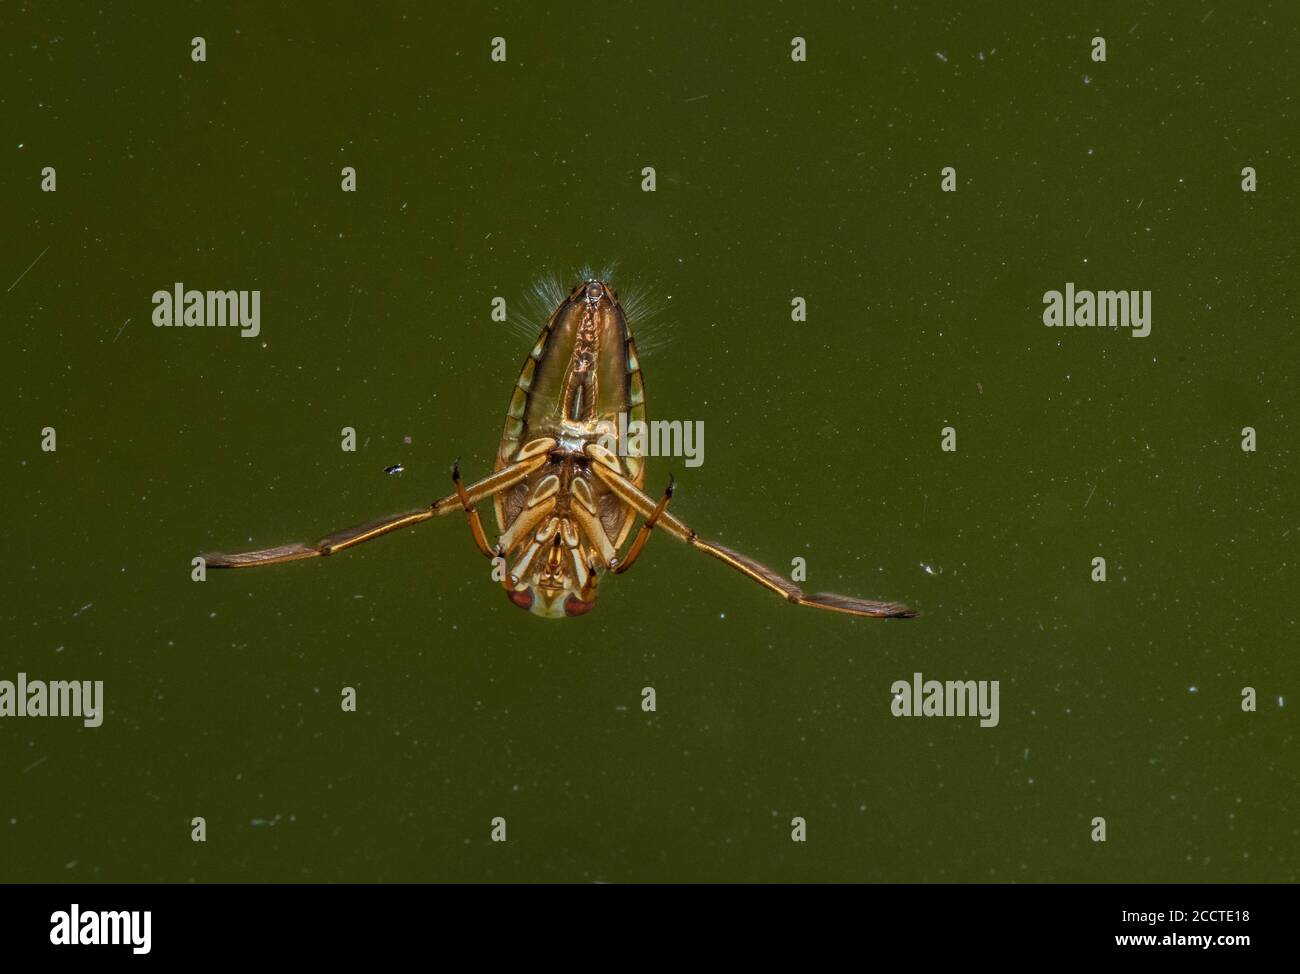 Common backswimmer,  Notonecta glauca, swimming upside down at the surface of water trough. Stock Photo